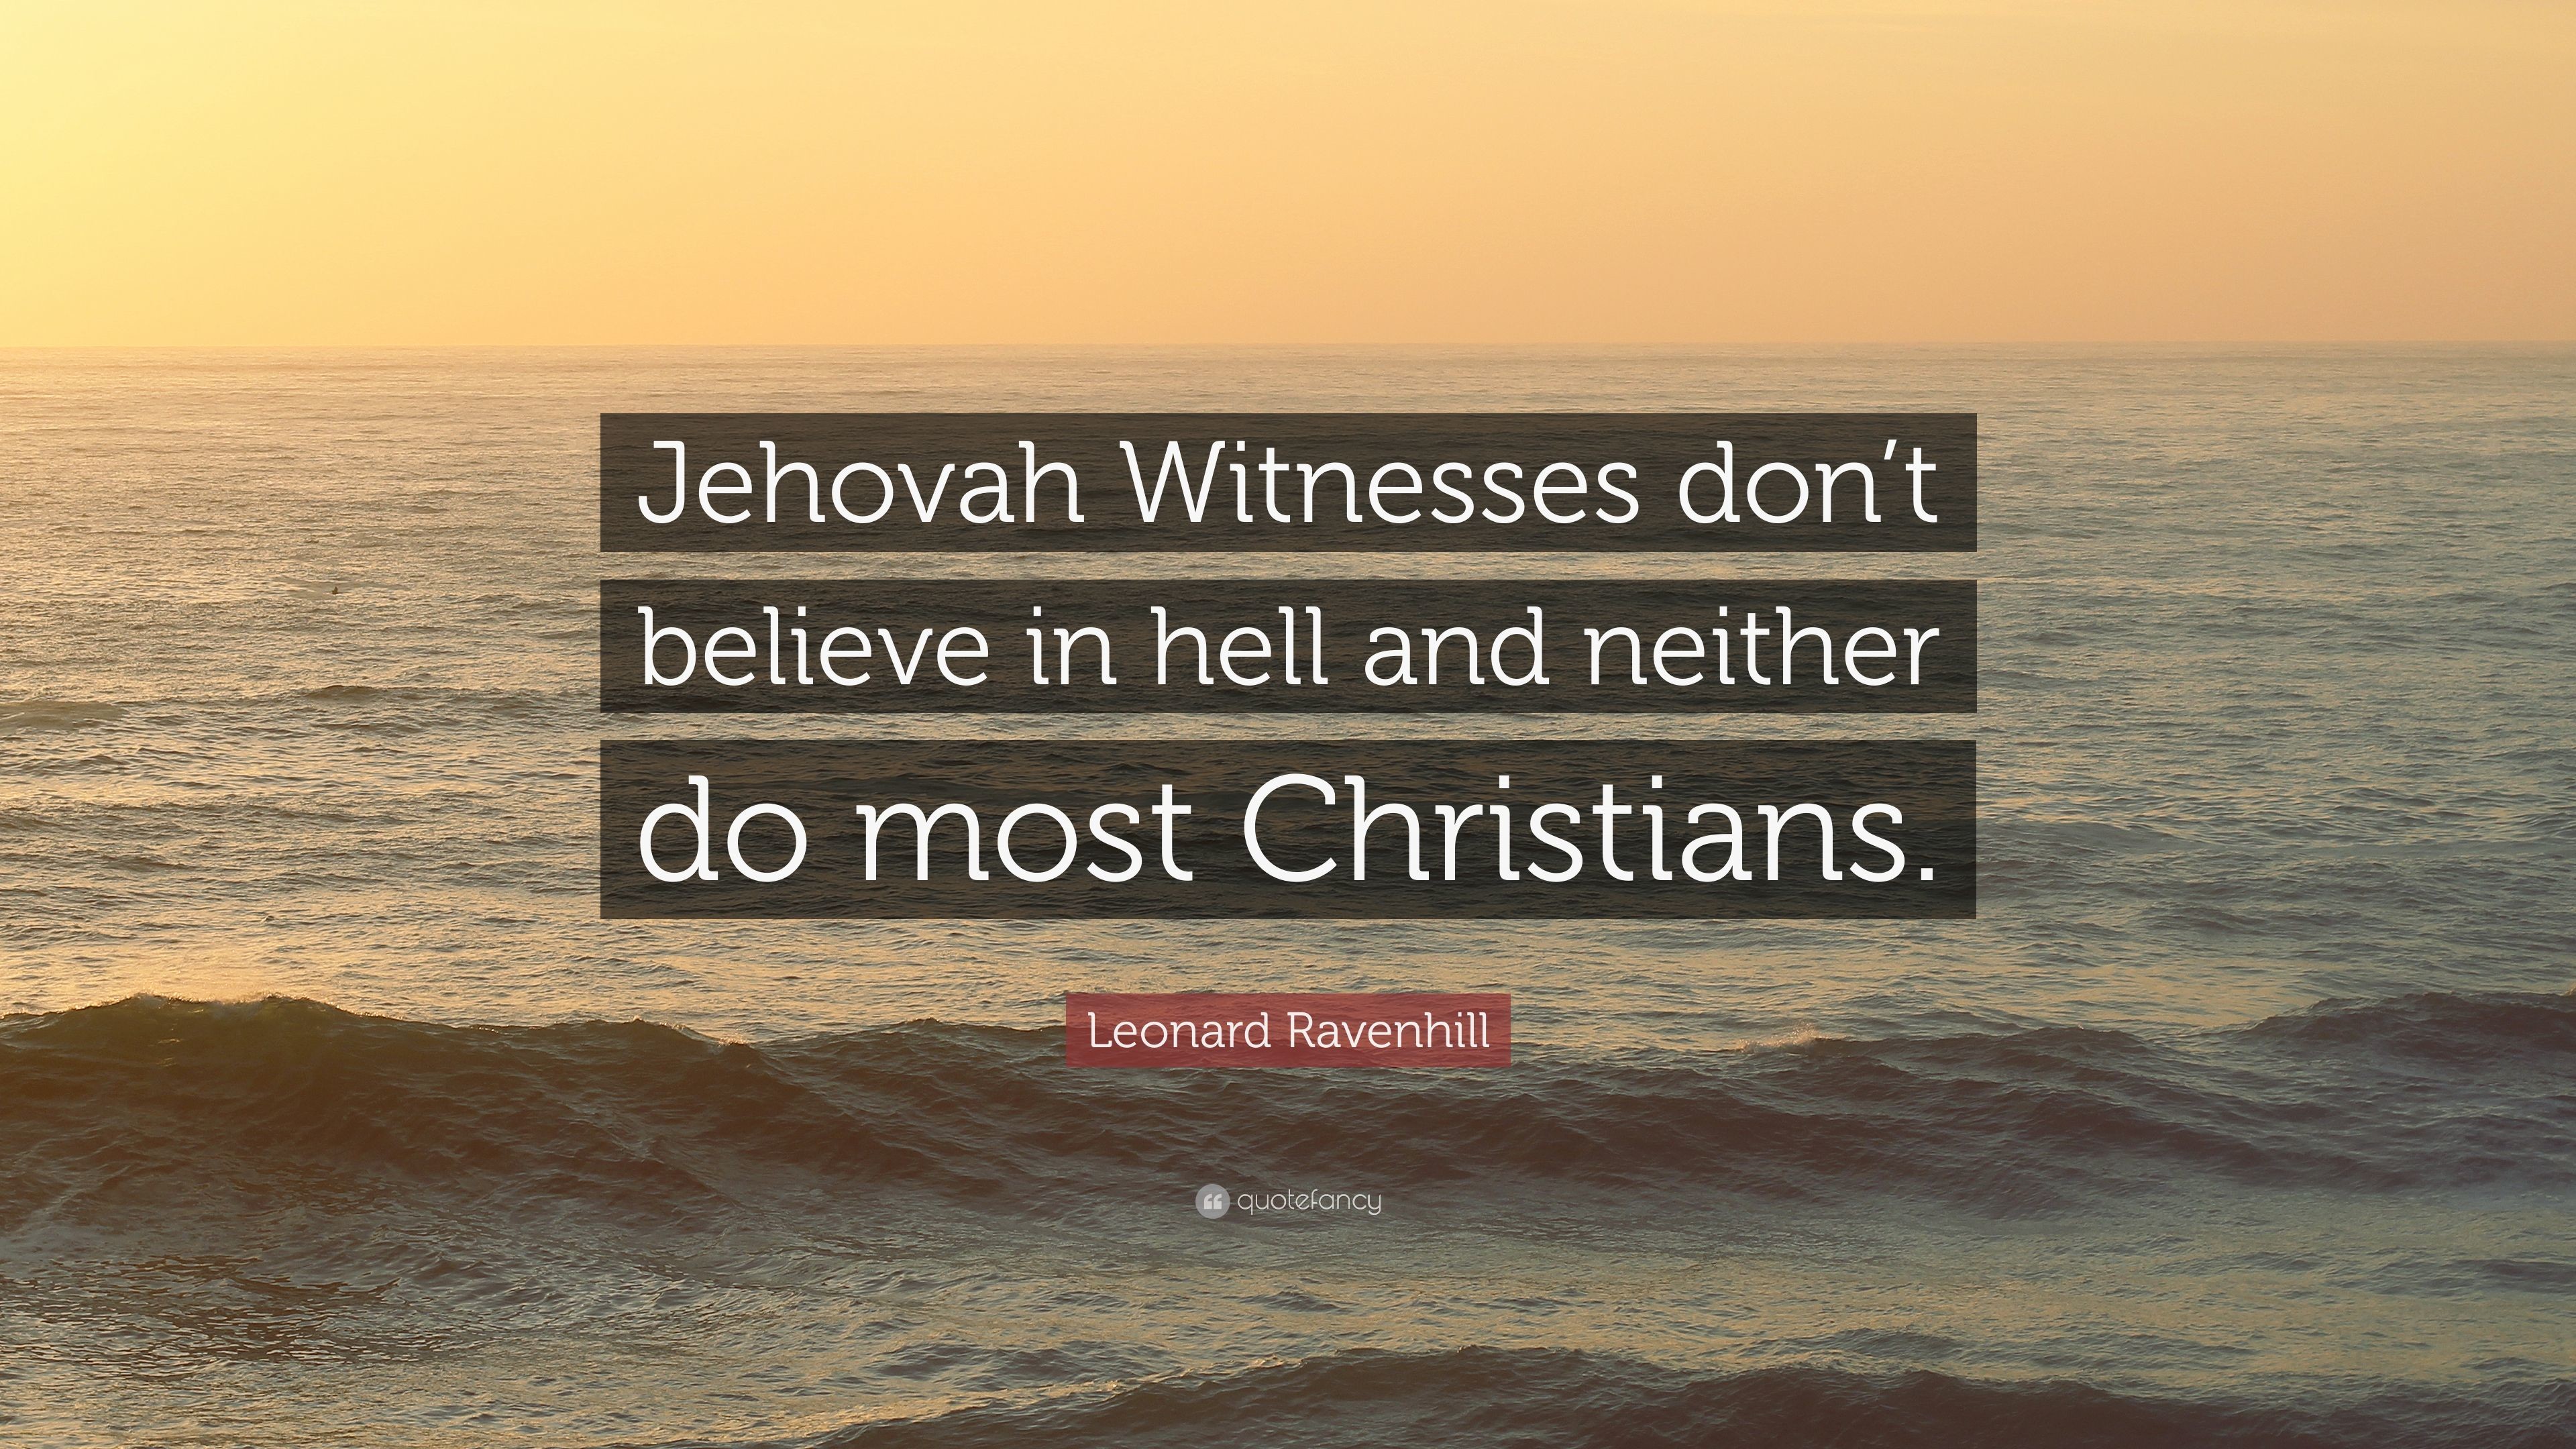 Leonard Ravenhill Quote Jehovah Witnesses dont believe in hell and neither do